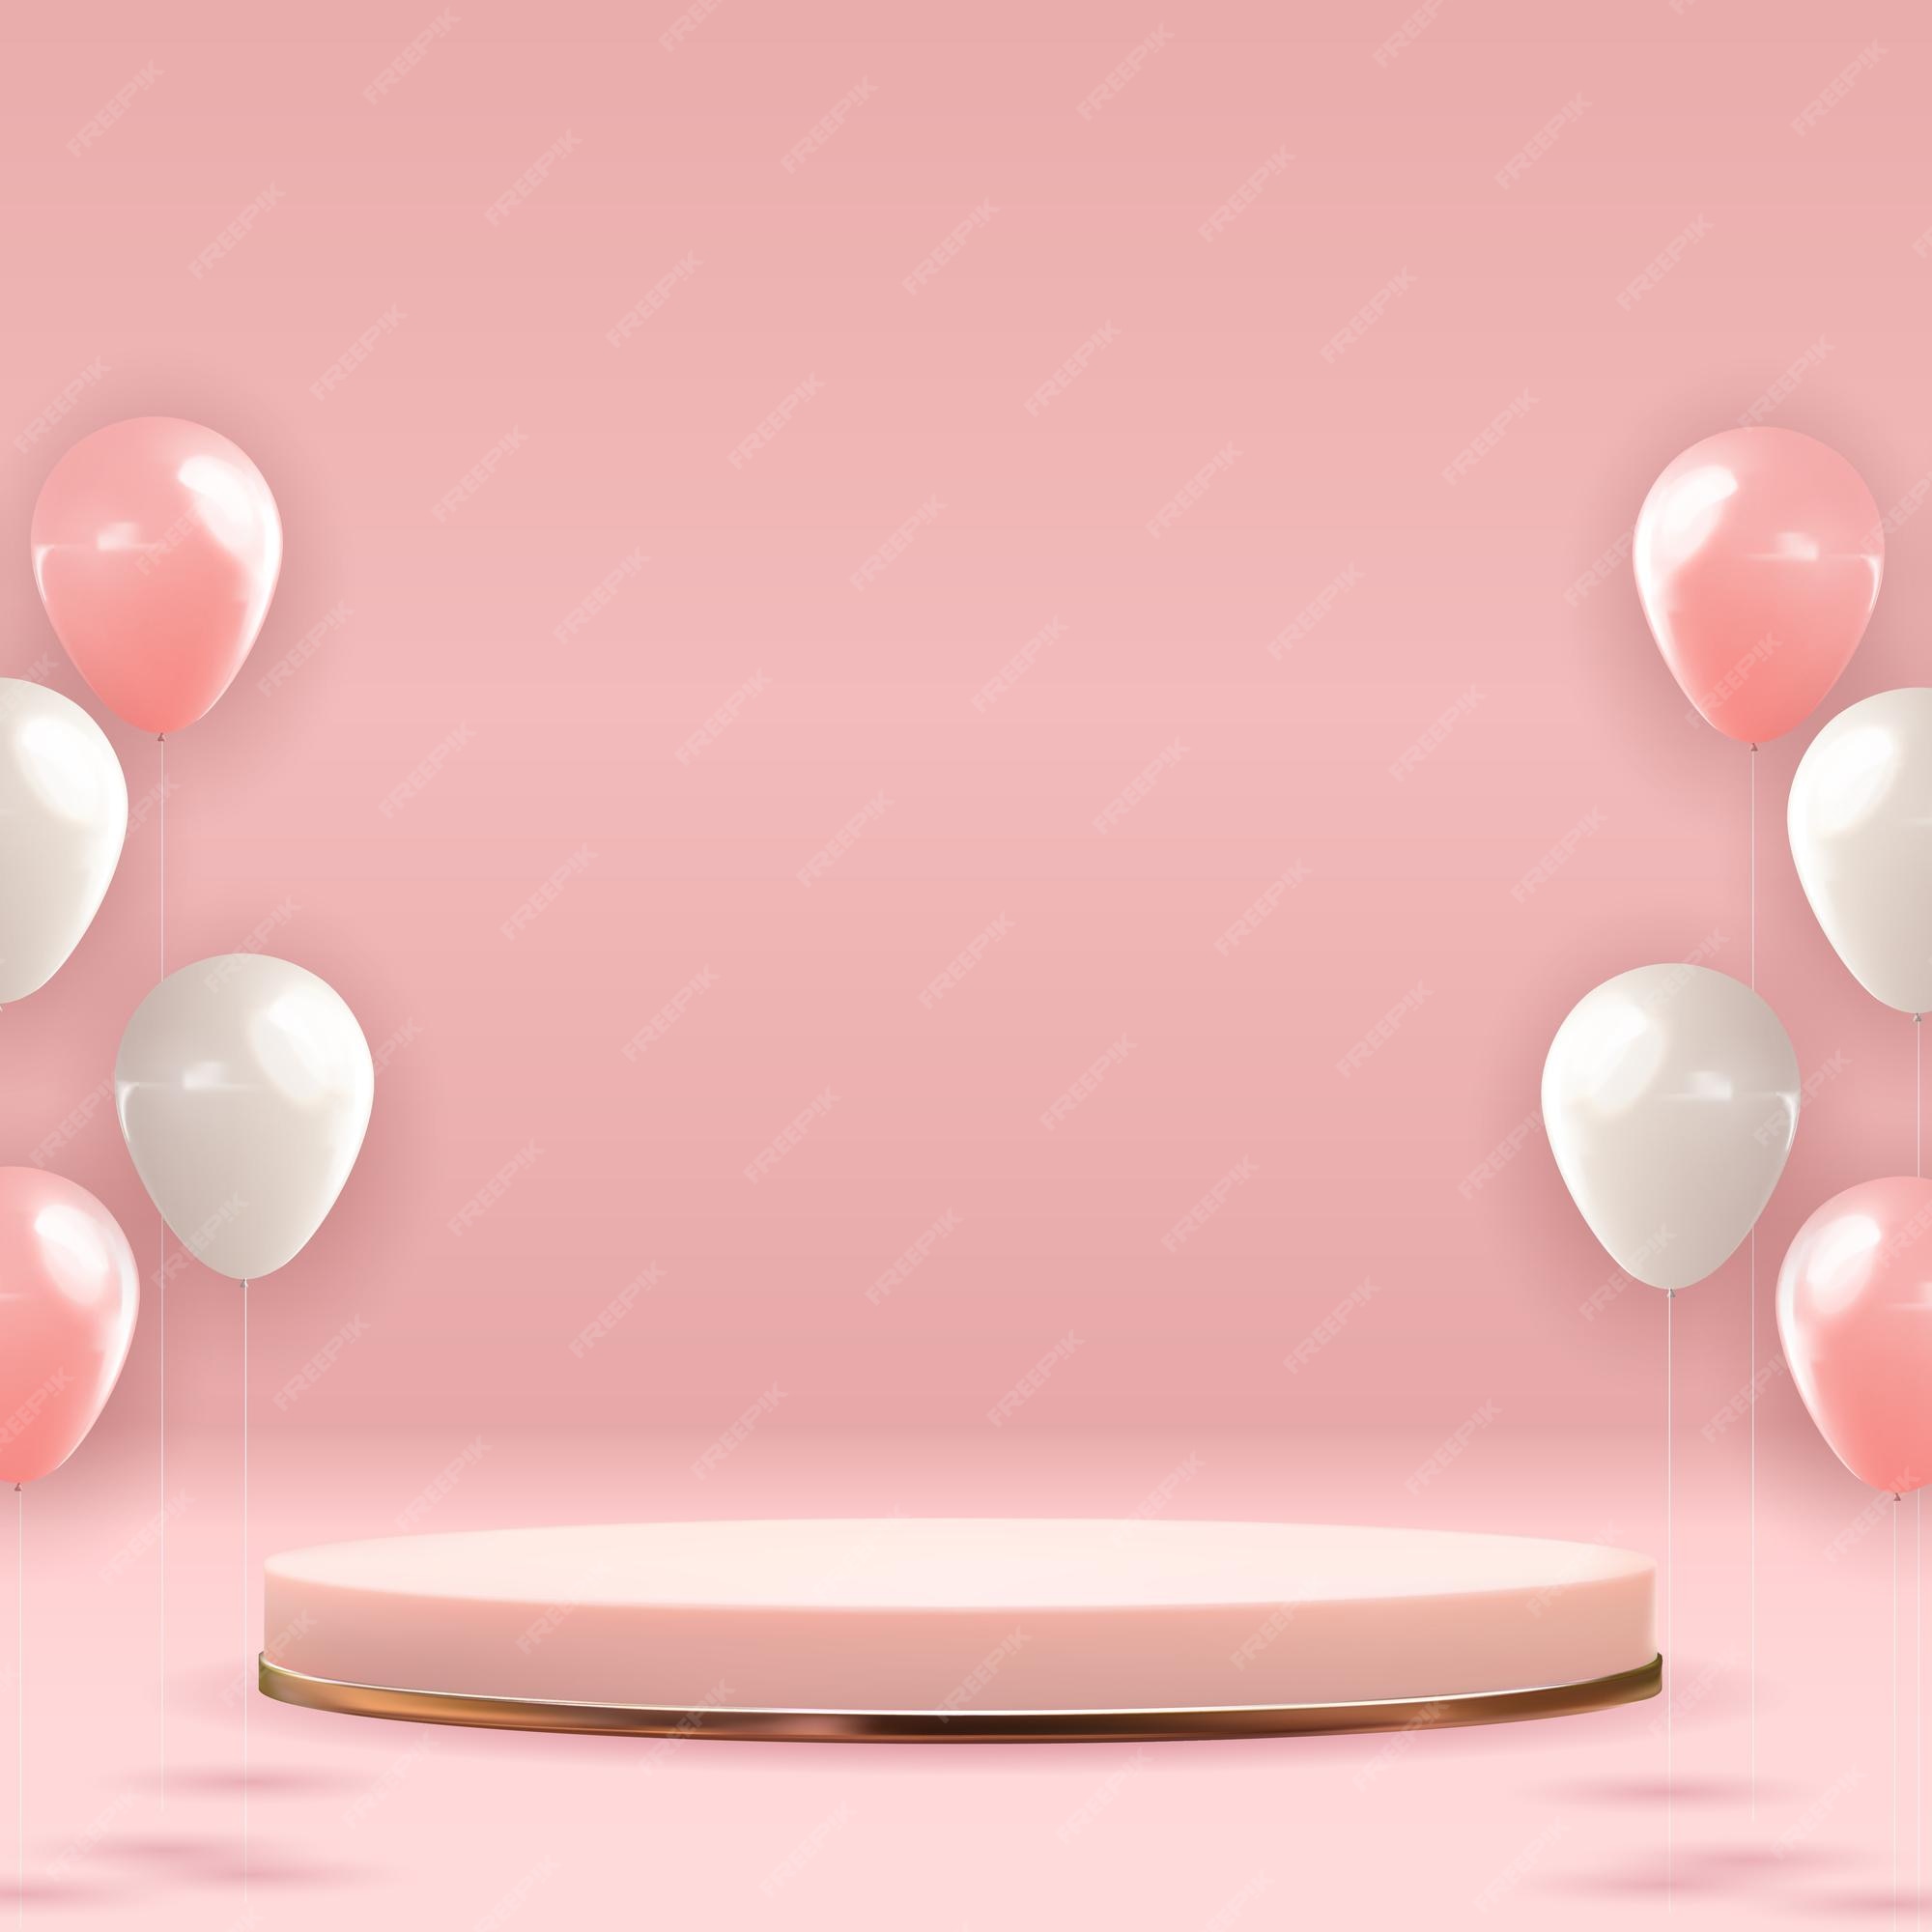 Premium Vector | Rose gold pedestal over pink pastel natural background  with balloons. trendy empty podium display for cosmetic product  presentation, fashion magazine. copy space vector illustration.